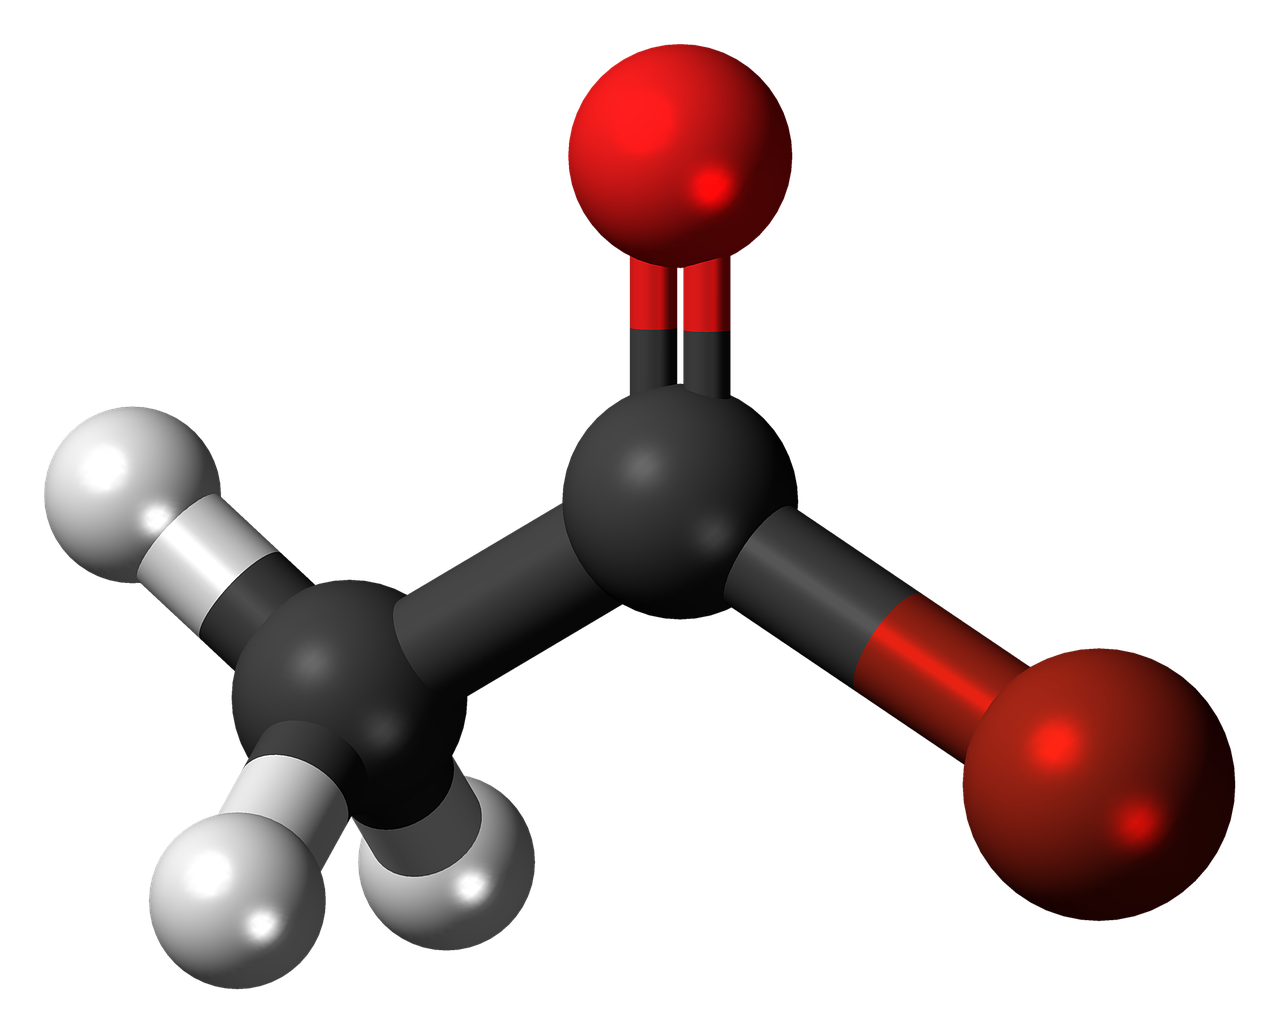 a close up of a model of a molecule, a raytraced image, digital art, red white and black color scheme, high detail illustration, detailed chemical diagram, sad scene